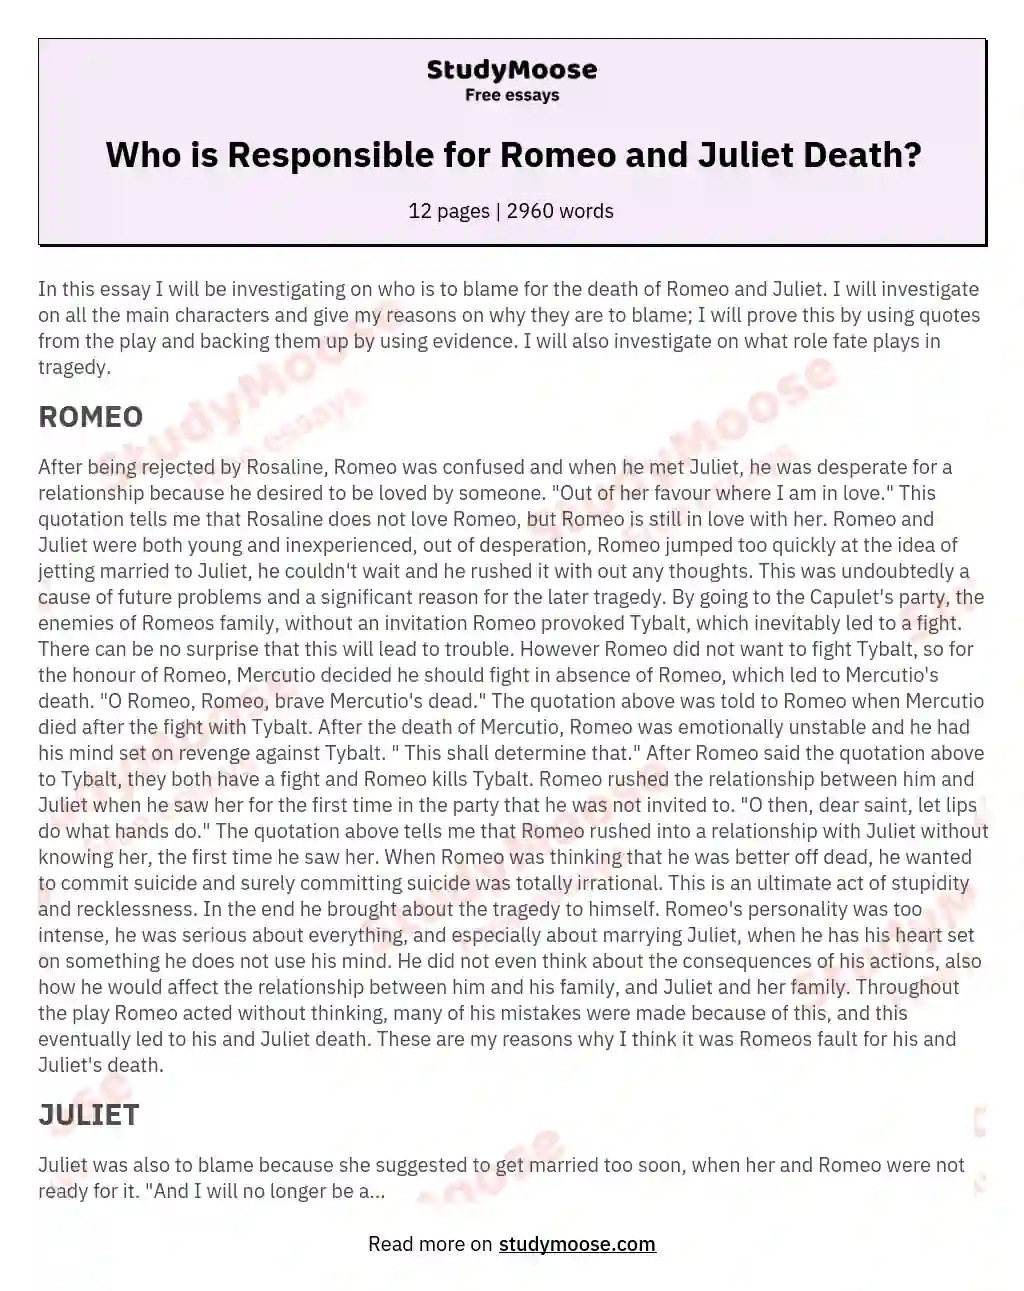 Who is Responsible for Romeo and Juliet Death? essay